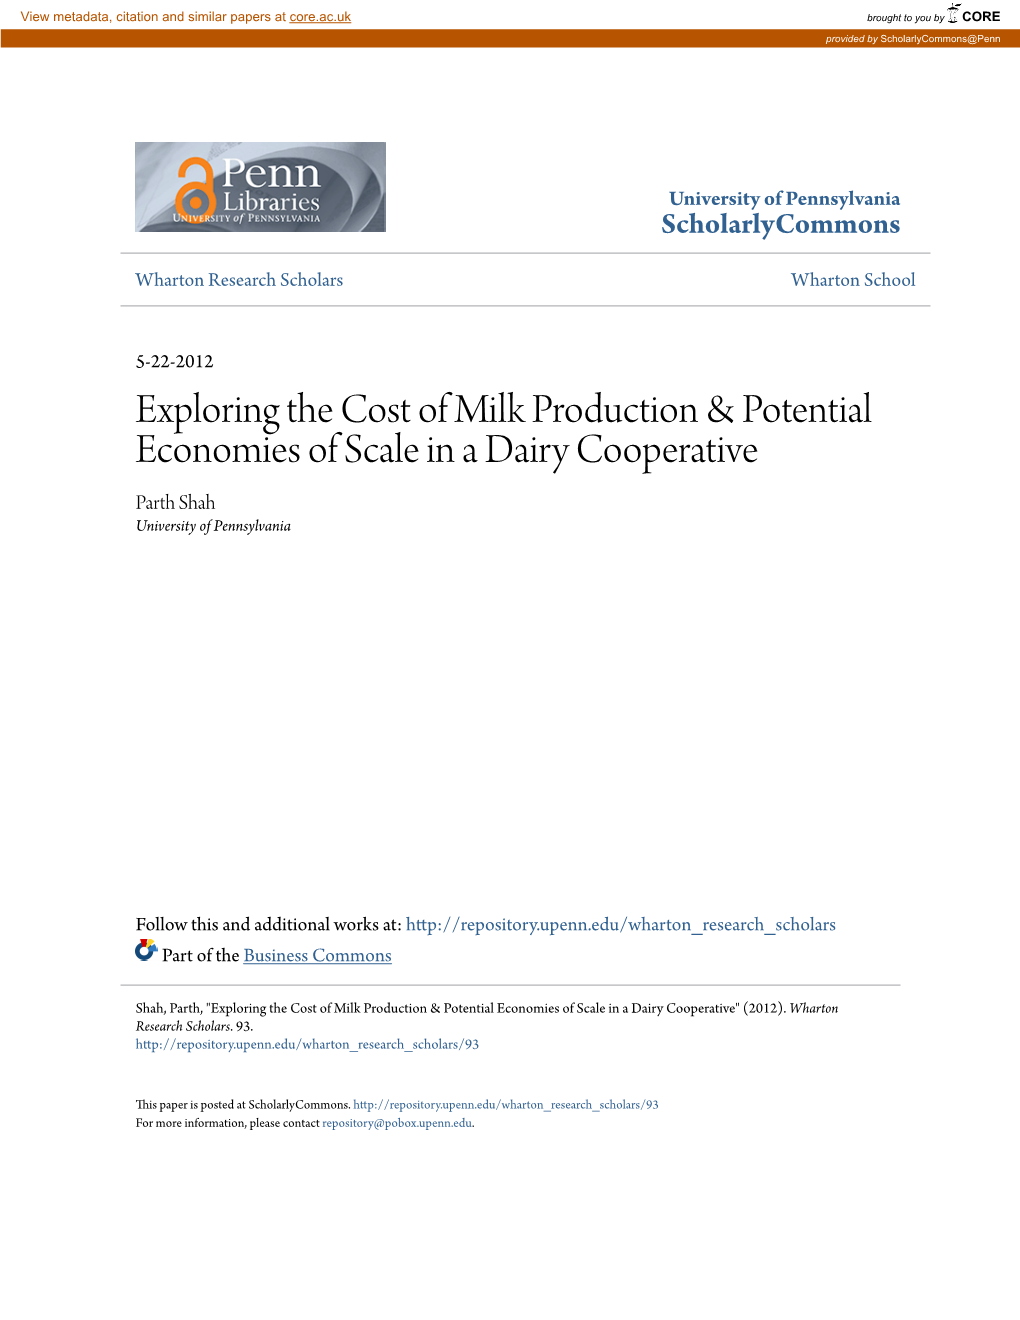 Exploring the Cost of Milk Production & Potential Economies Of